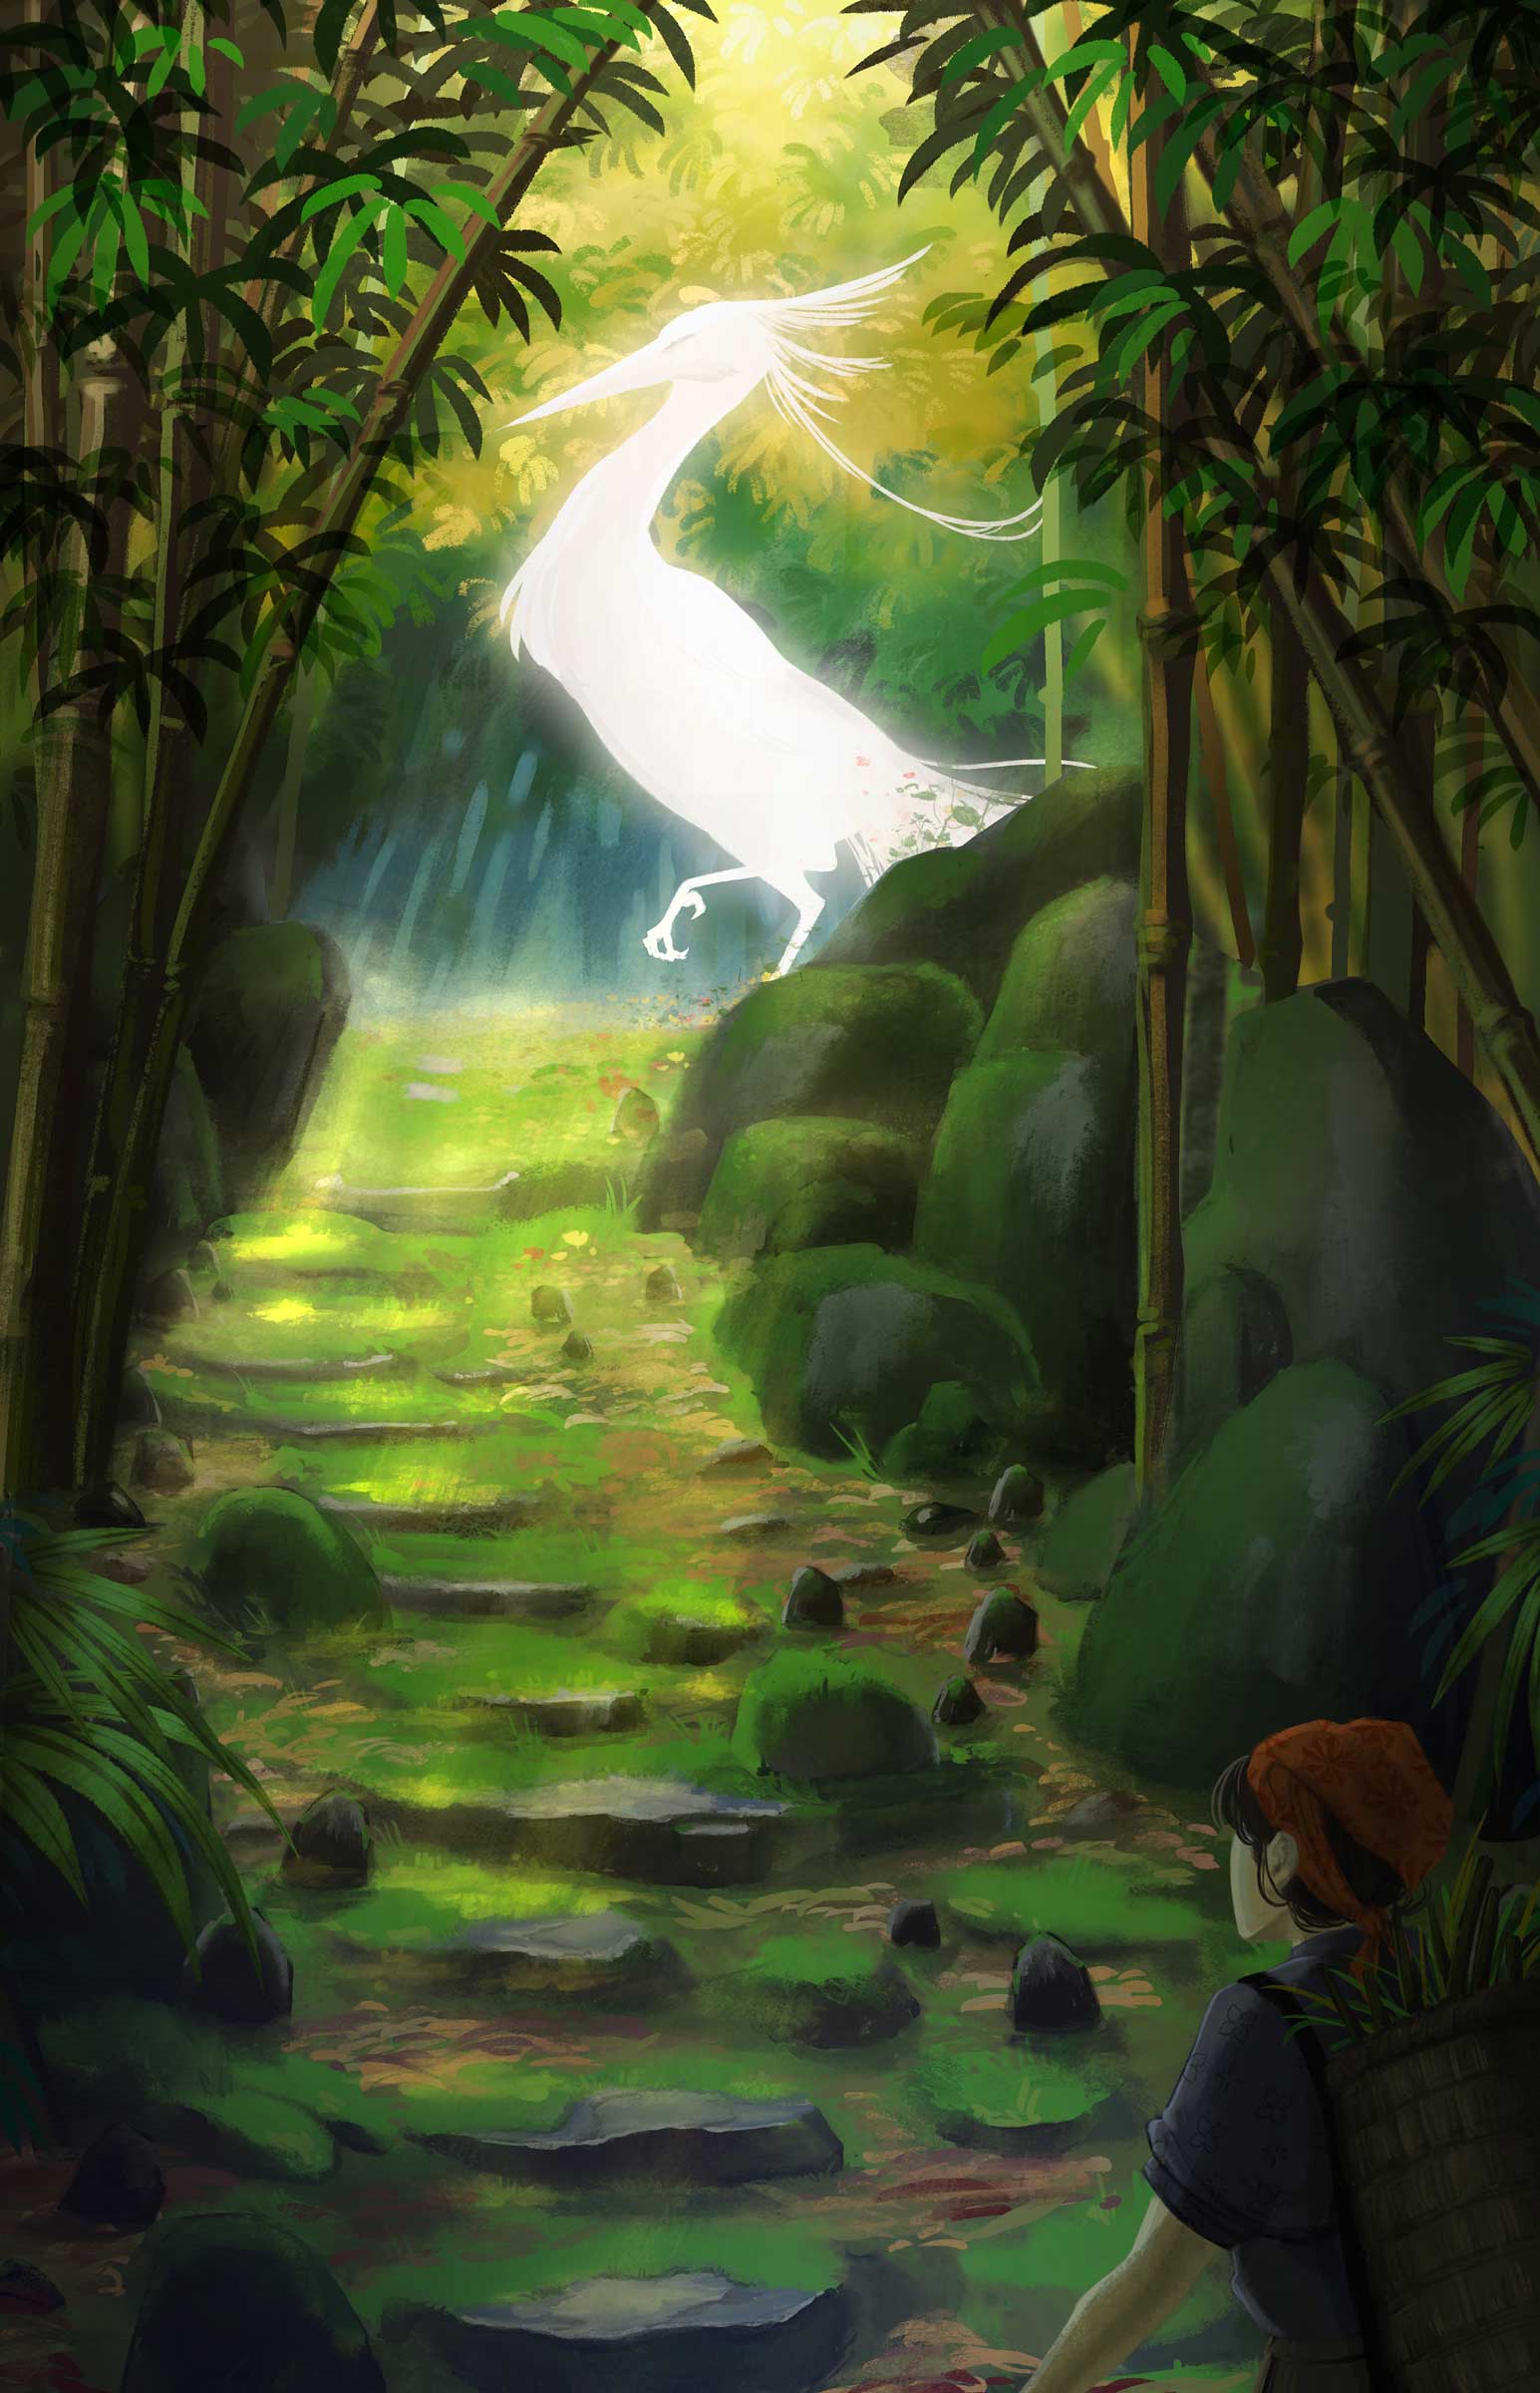 A glowing white bird in a serene bamboo forest.